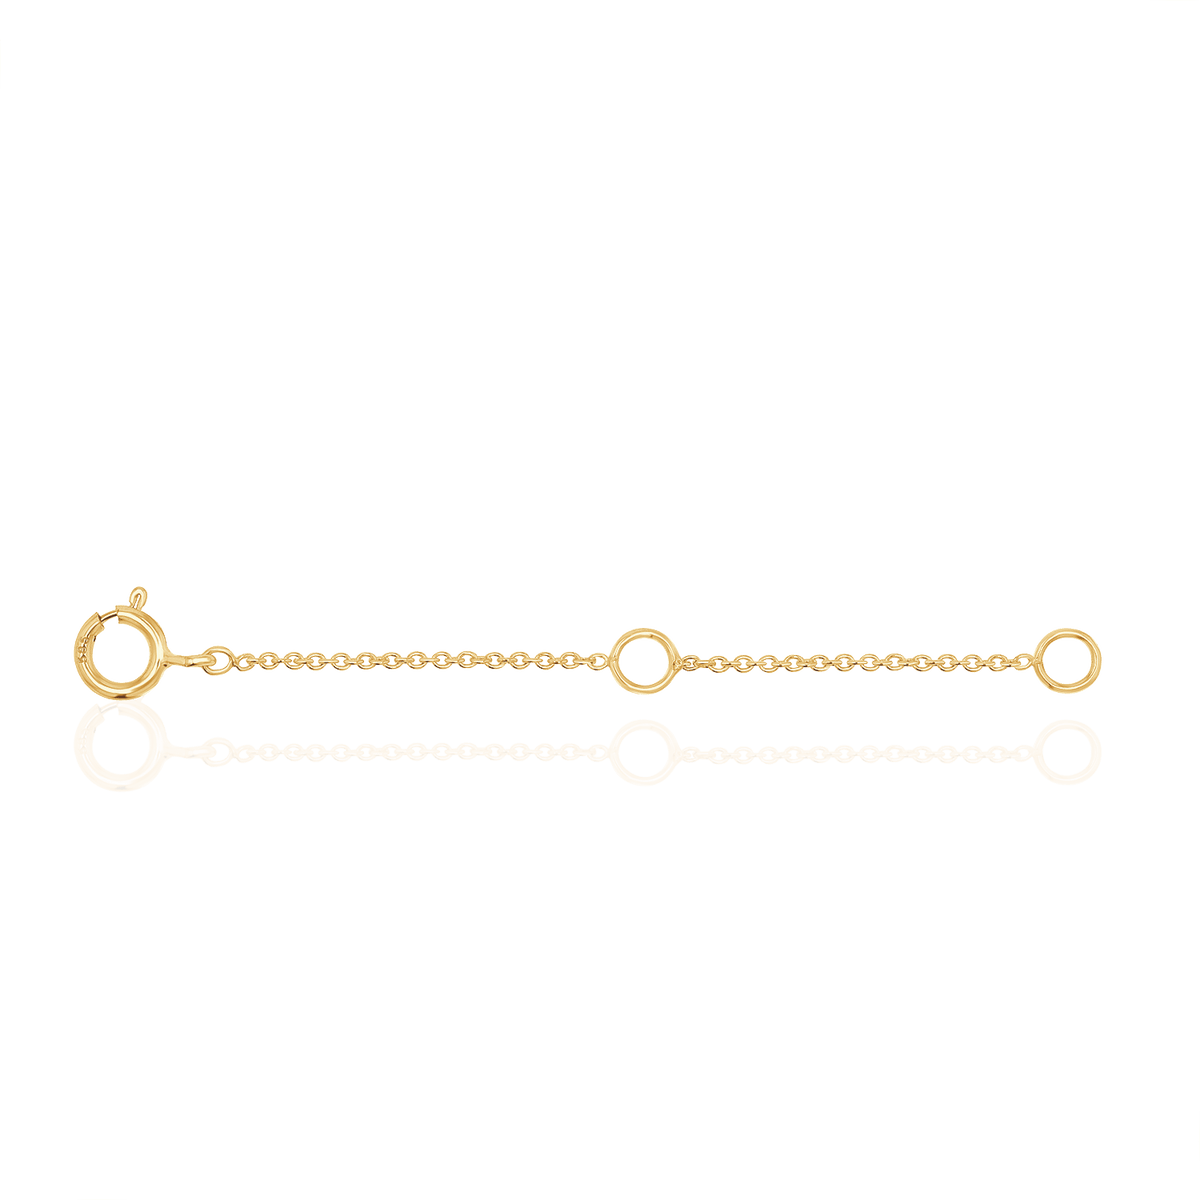 Bracelet Chain Extender, Jewelry Extension Gold